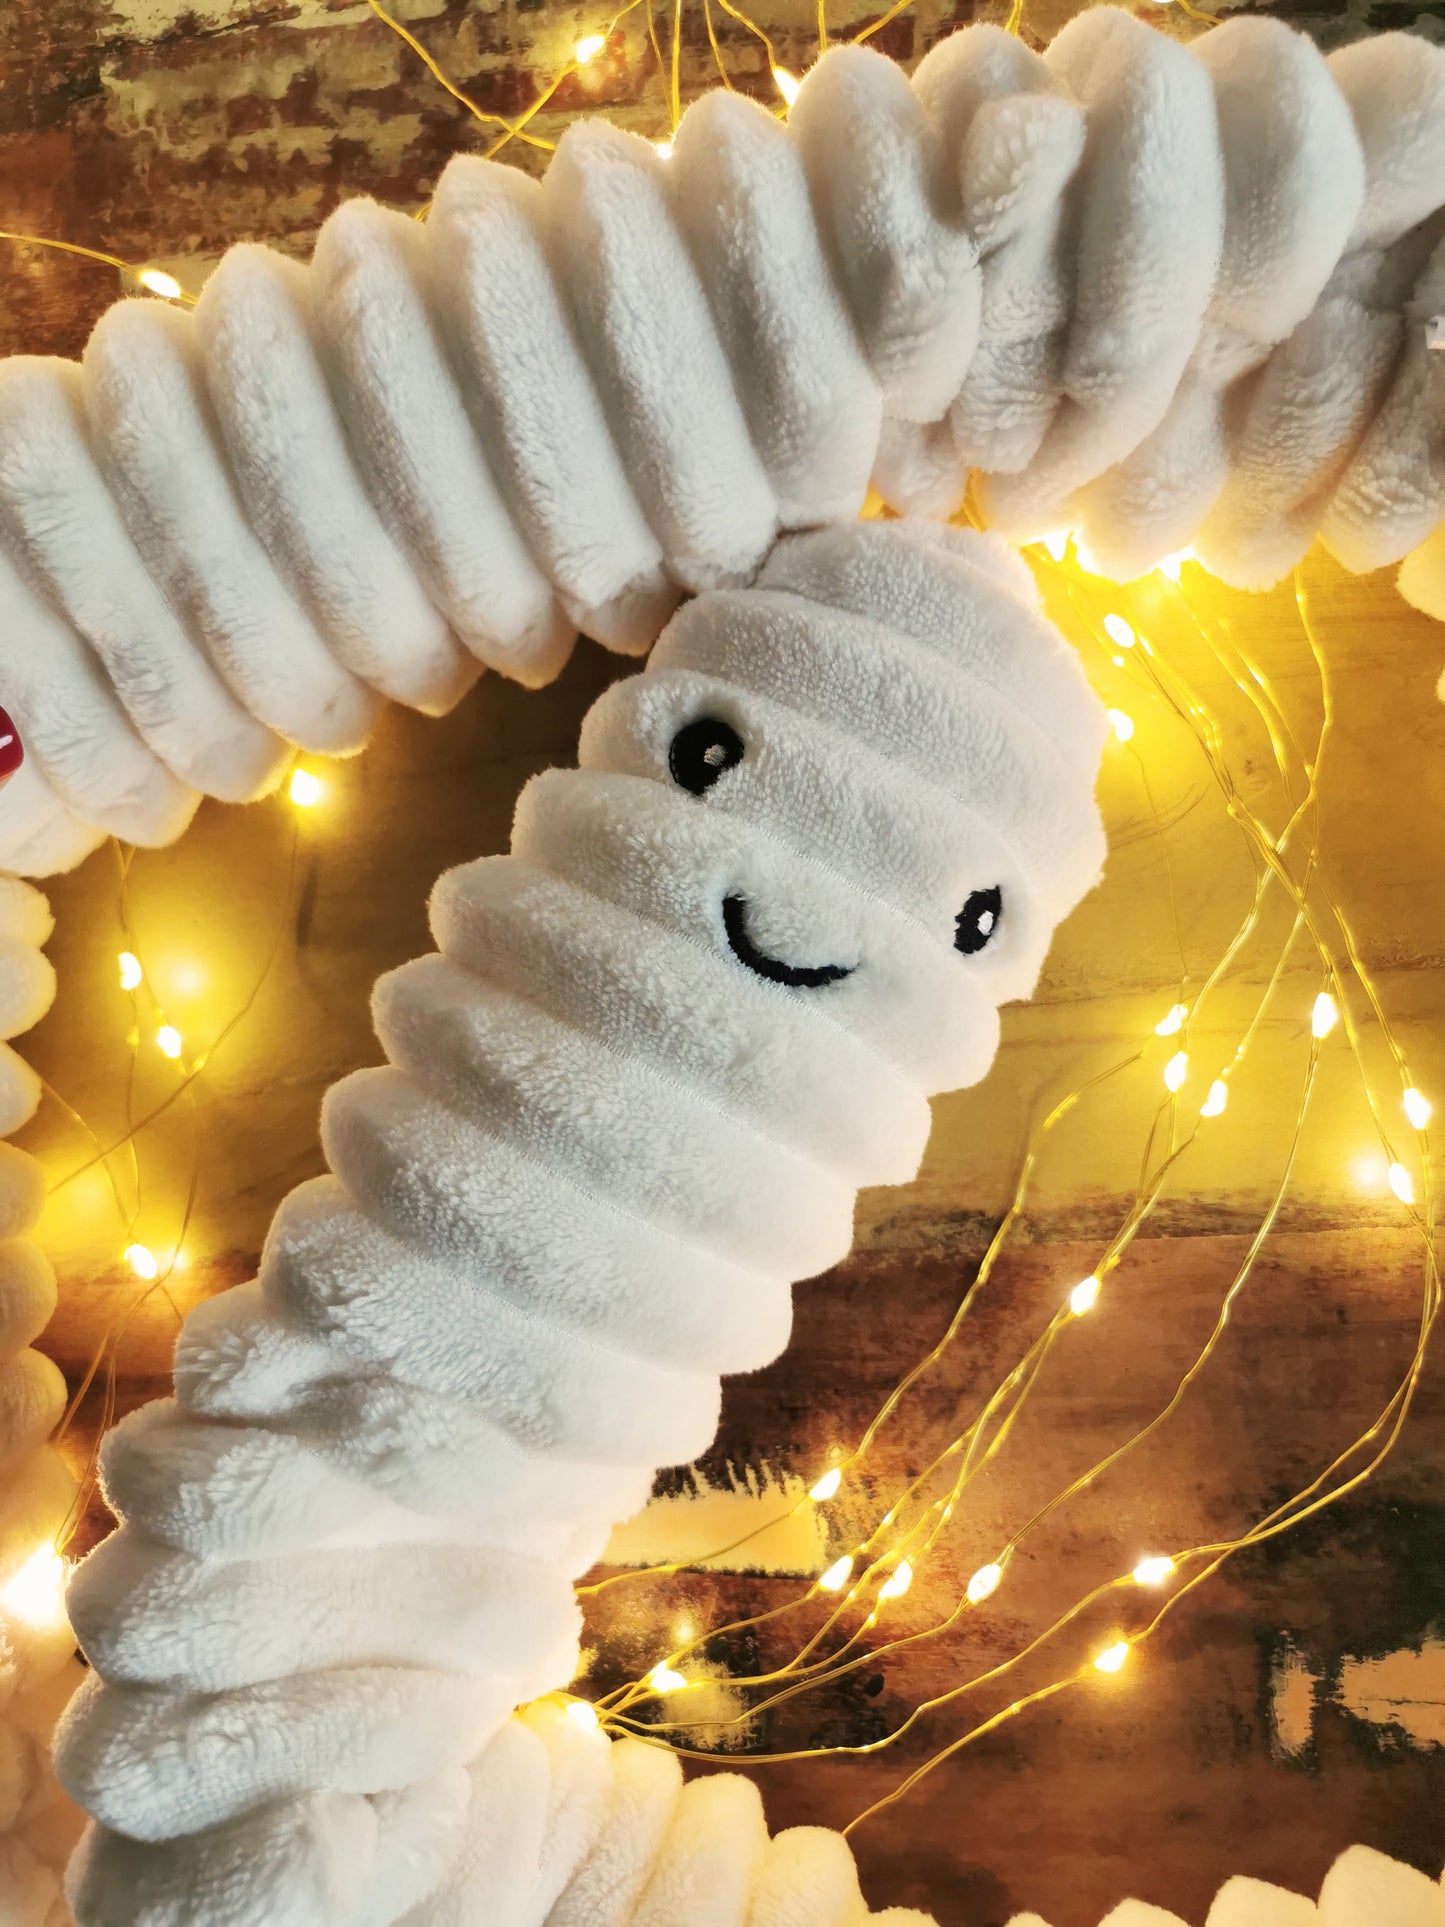 White bean giant earth worm plush, soft cuddling critter, fun home decor buddy, long worry worm to sooth your mind, 160cm